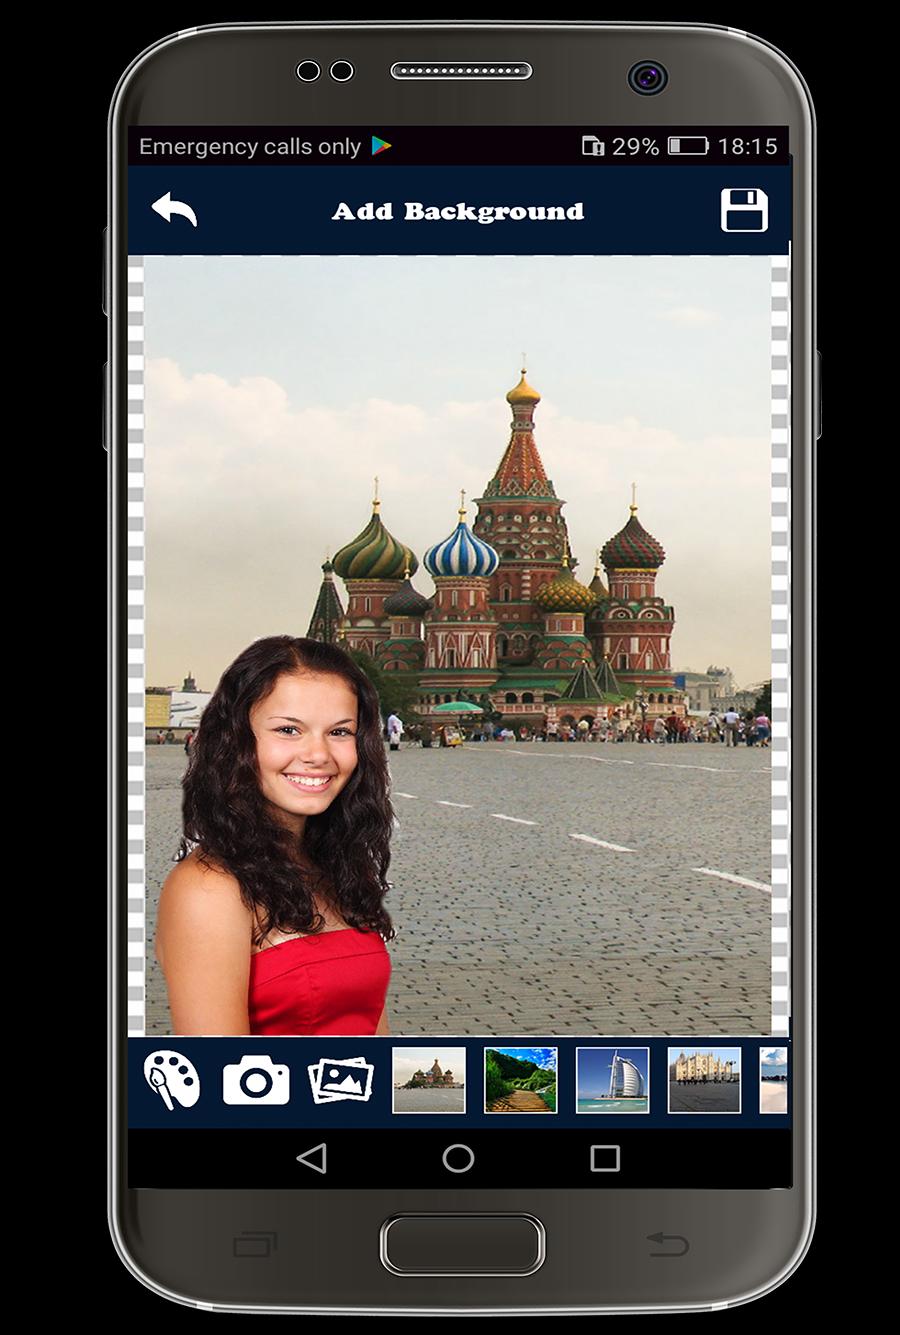 Change Photo Background - Auto Changer Backgrounds for Android - APK